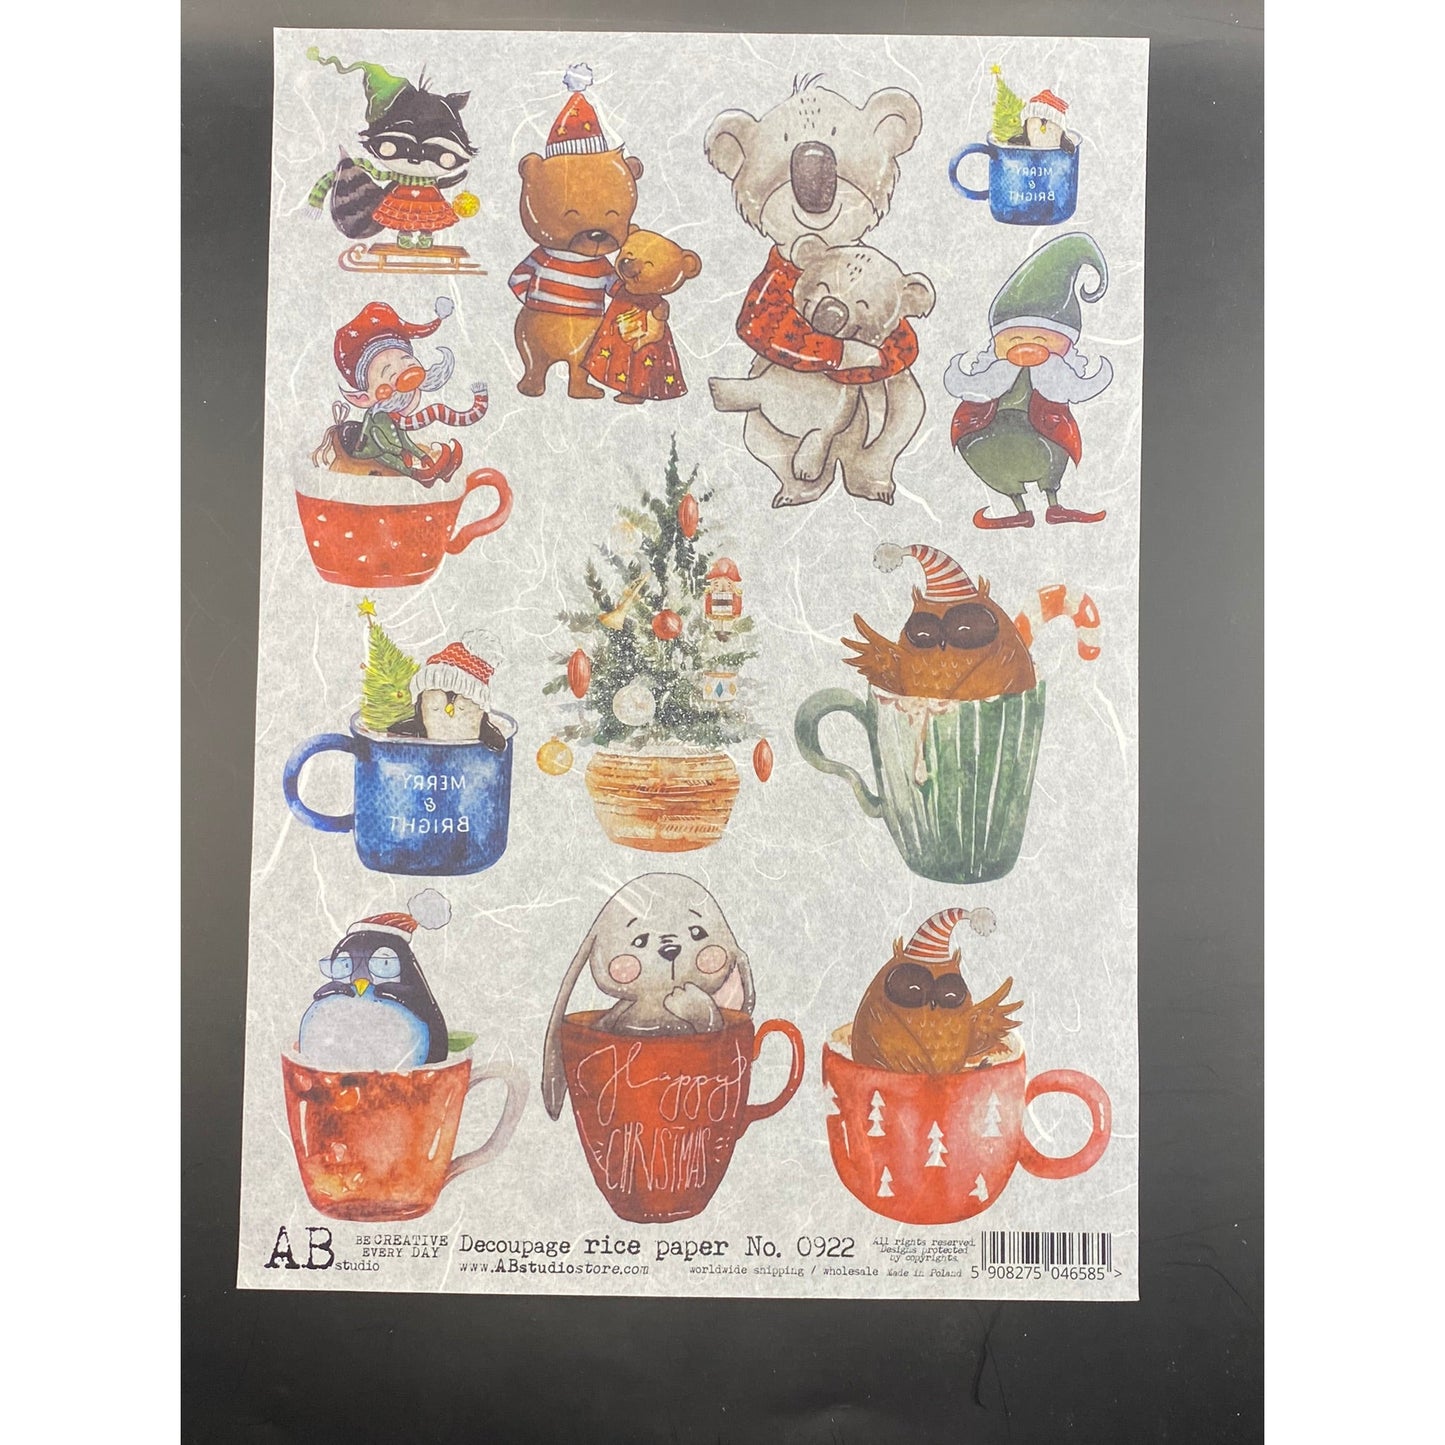 0003 - 6 Rice Papers - AB Studios A Simple Christmas Story - 6 Pages Total - Animals, Ornaments, Christmas Background